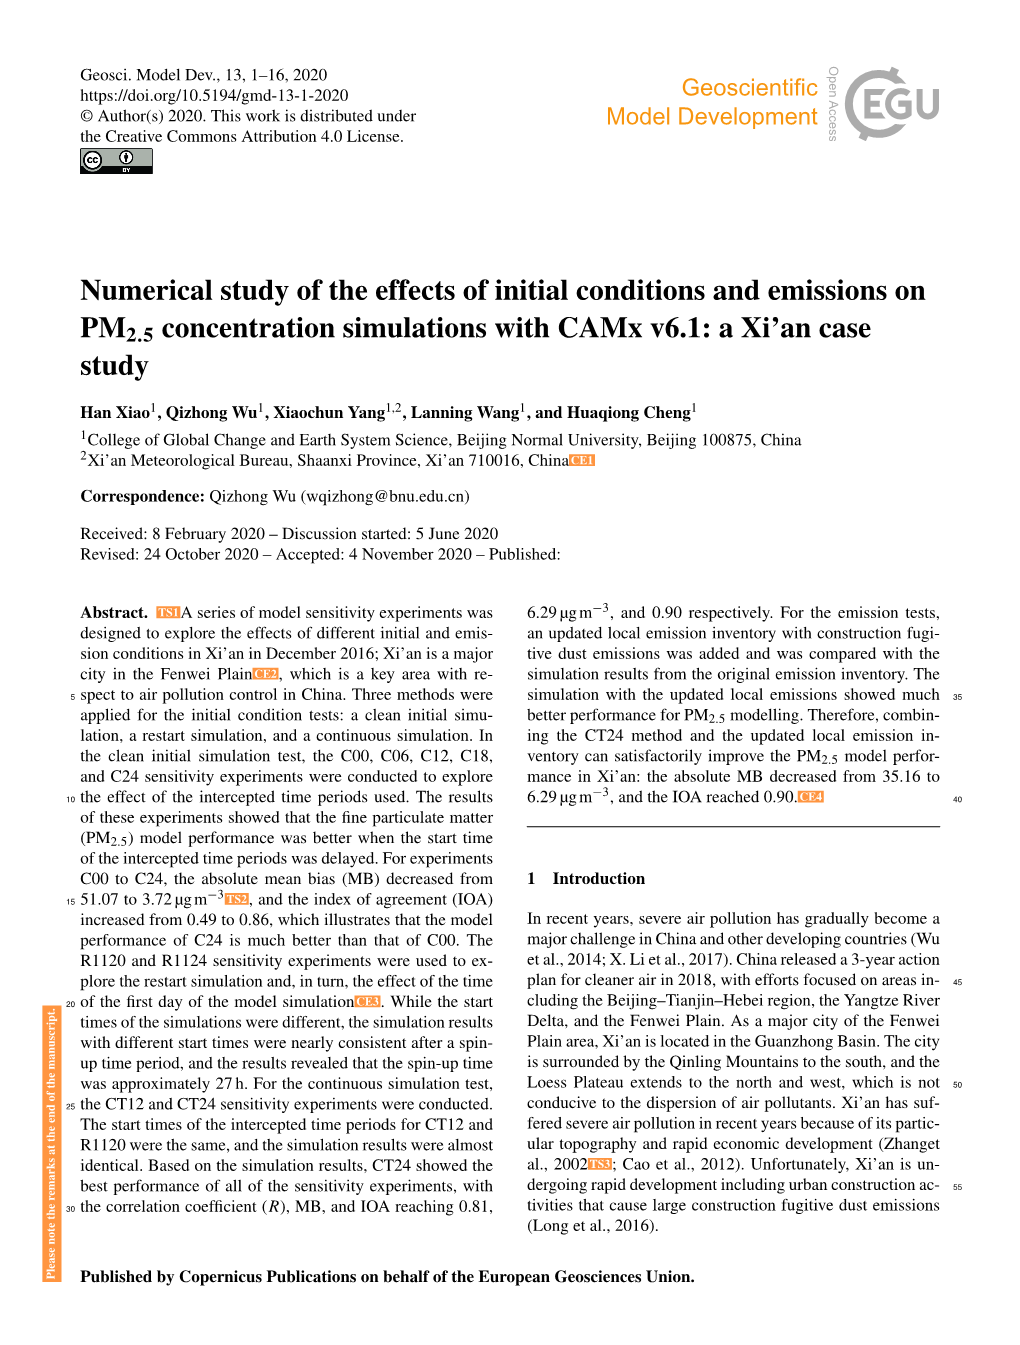 Numerical Study of the Effects of Initial Conditions and Emissions on PM2.5 Concentration Simulations with Camx V6.1: a Xi’An Case Study